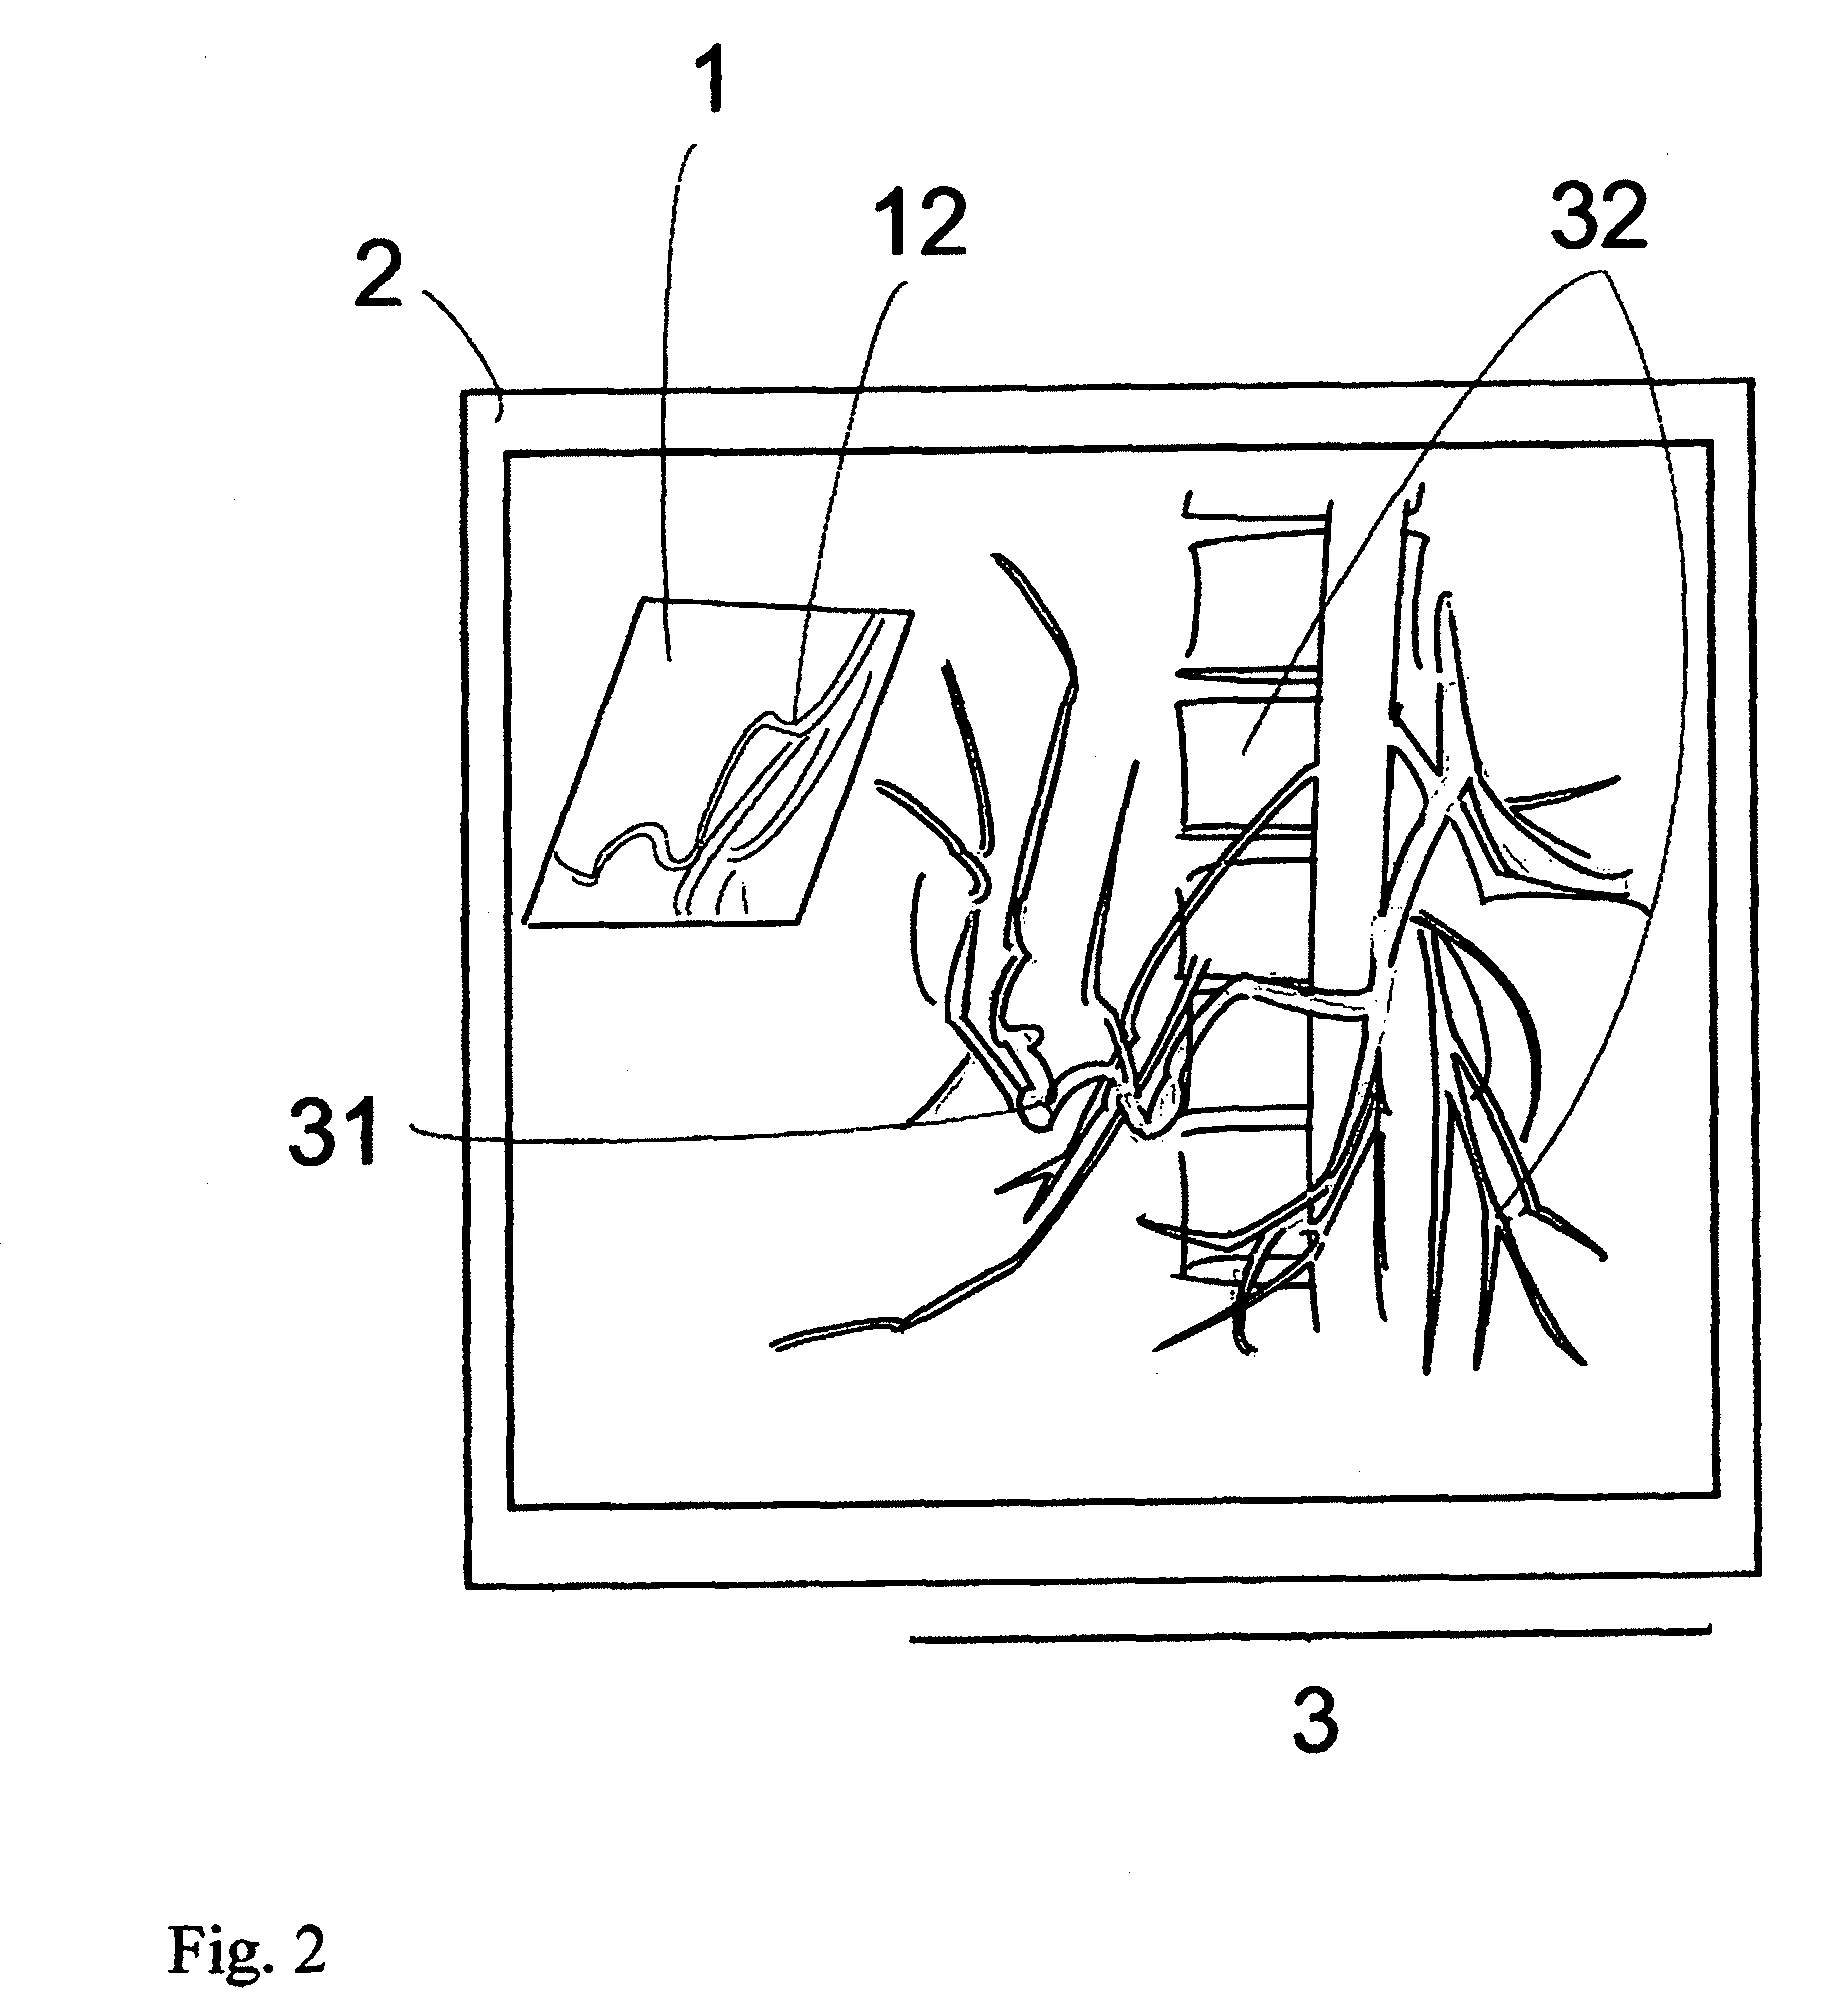 Virtual penetrating mirror device for visualizing virtual objects in angiographic applications